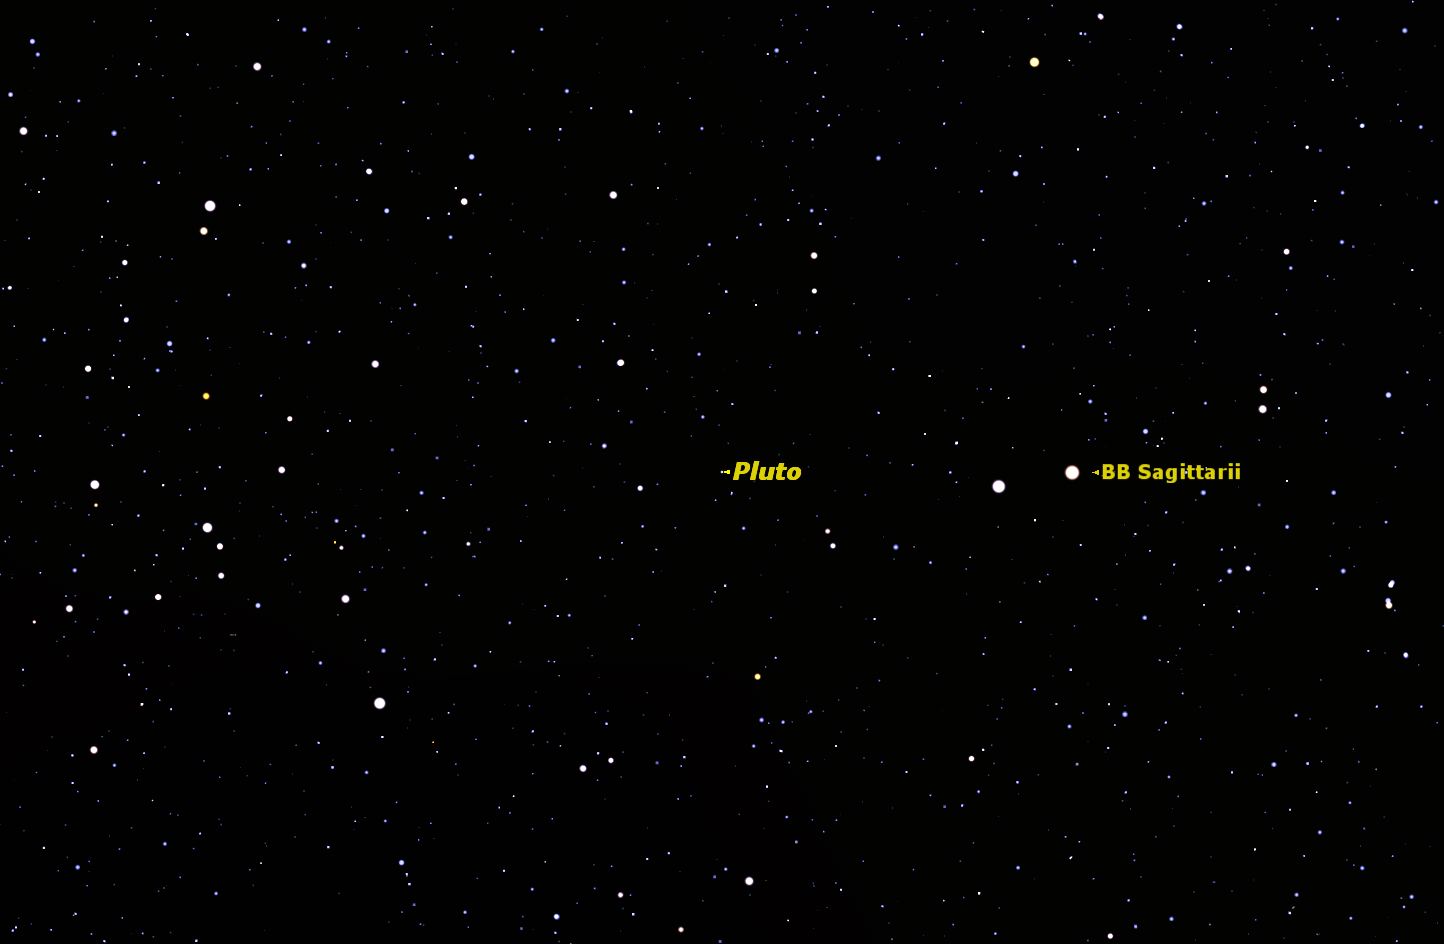 With BB Sagittarii in your telescope at high power, scan the star field for tiny Pluto. Credit: Starry Night software.